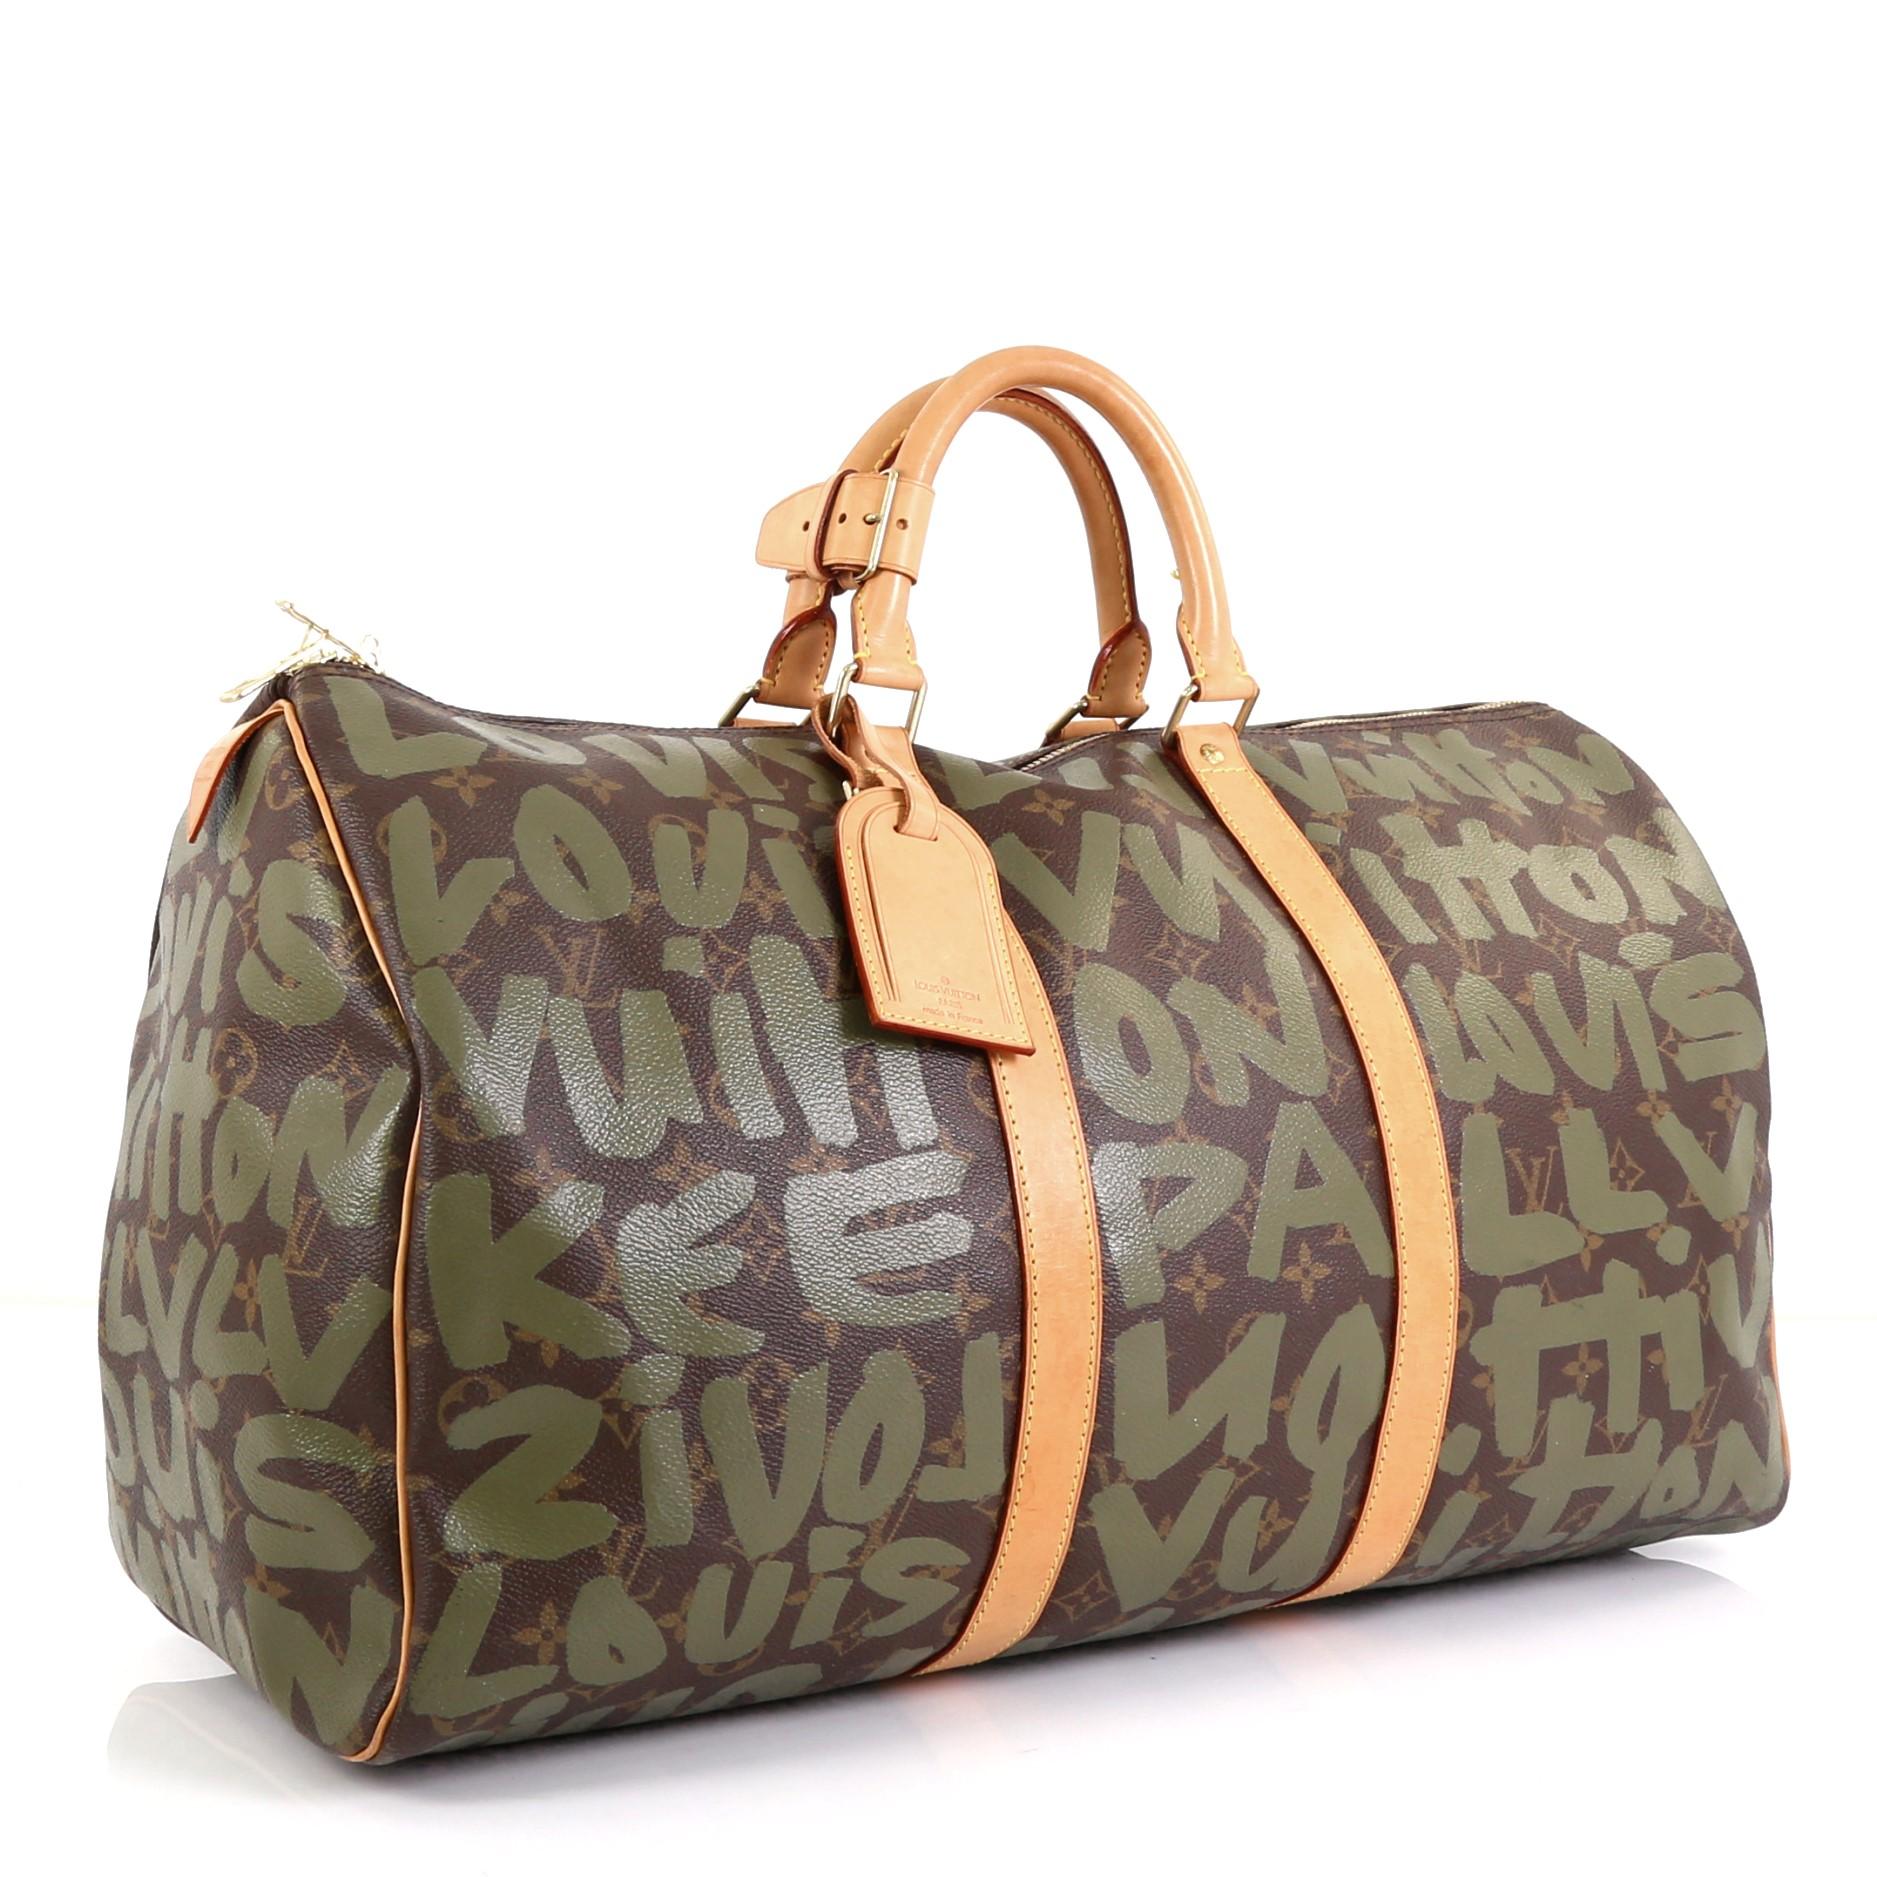 This Louis Vuitton Keepall Bag Limited Edition Monogram Graffiti 50, crafted from brown monogram and green graffiti coated canvas, features dual rolled handles, natural cowhide leather trim, graffiti print by Stephen Sprouse, and gold-tone hardware.